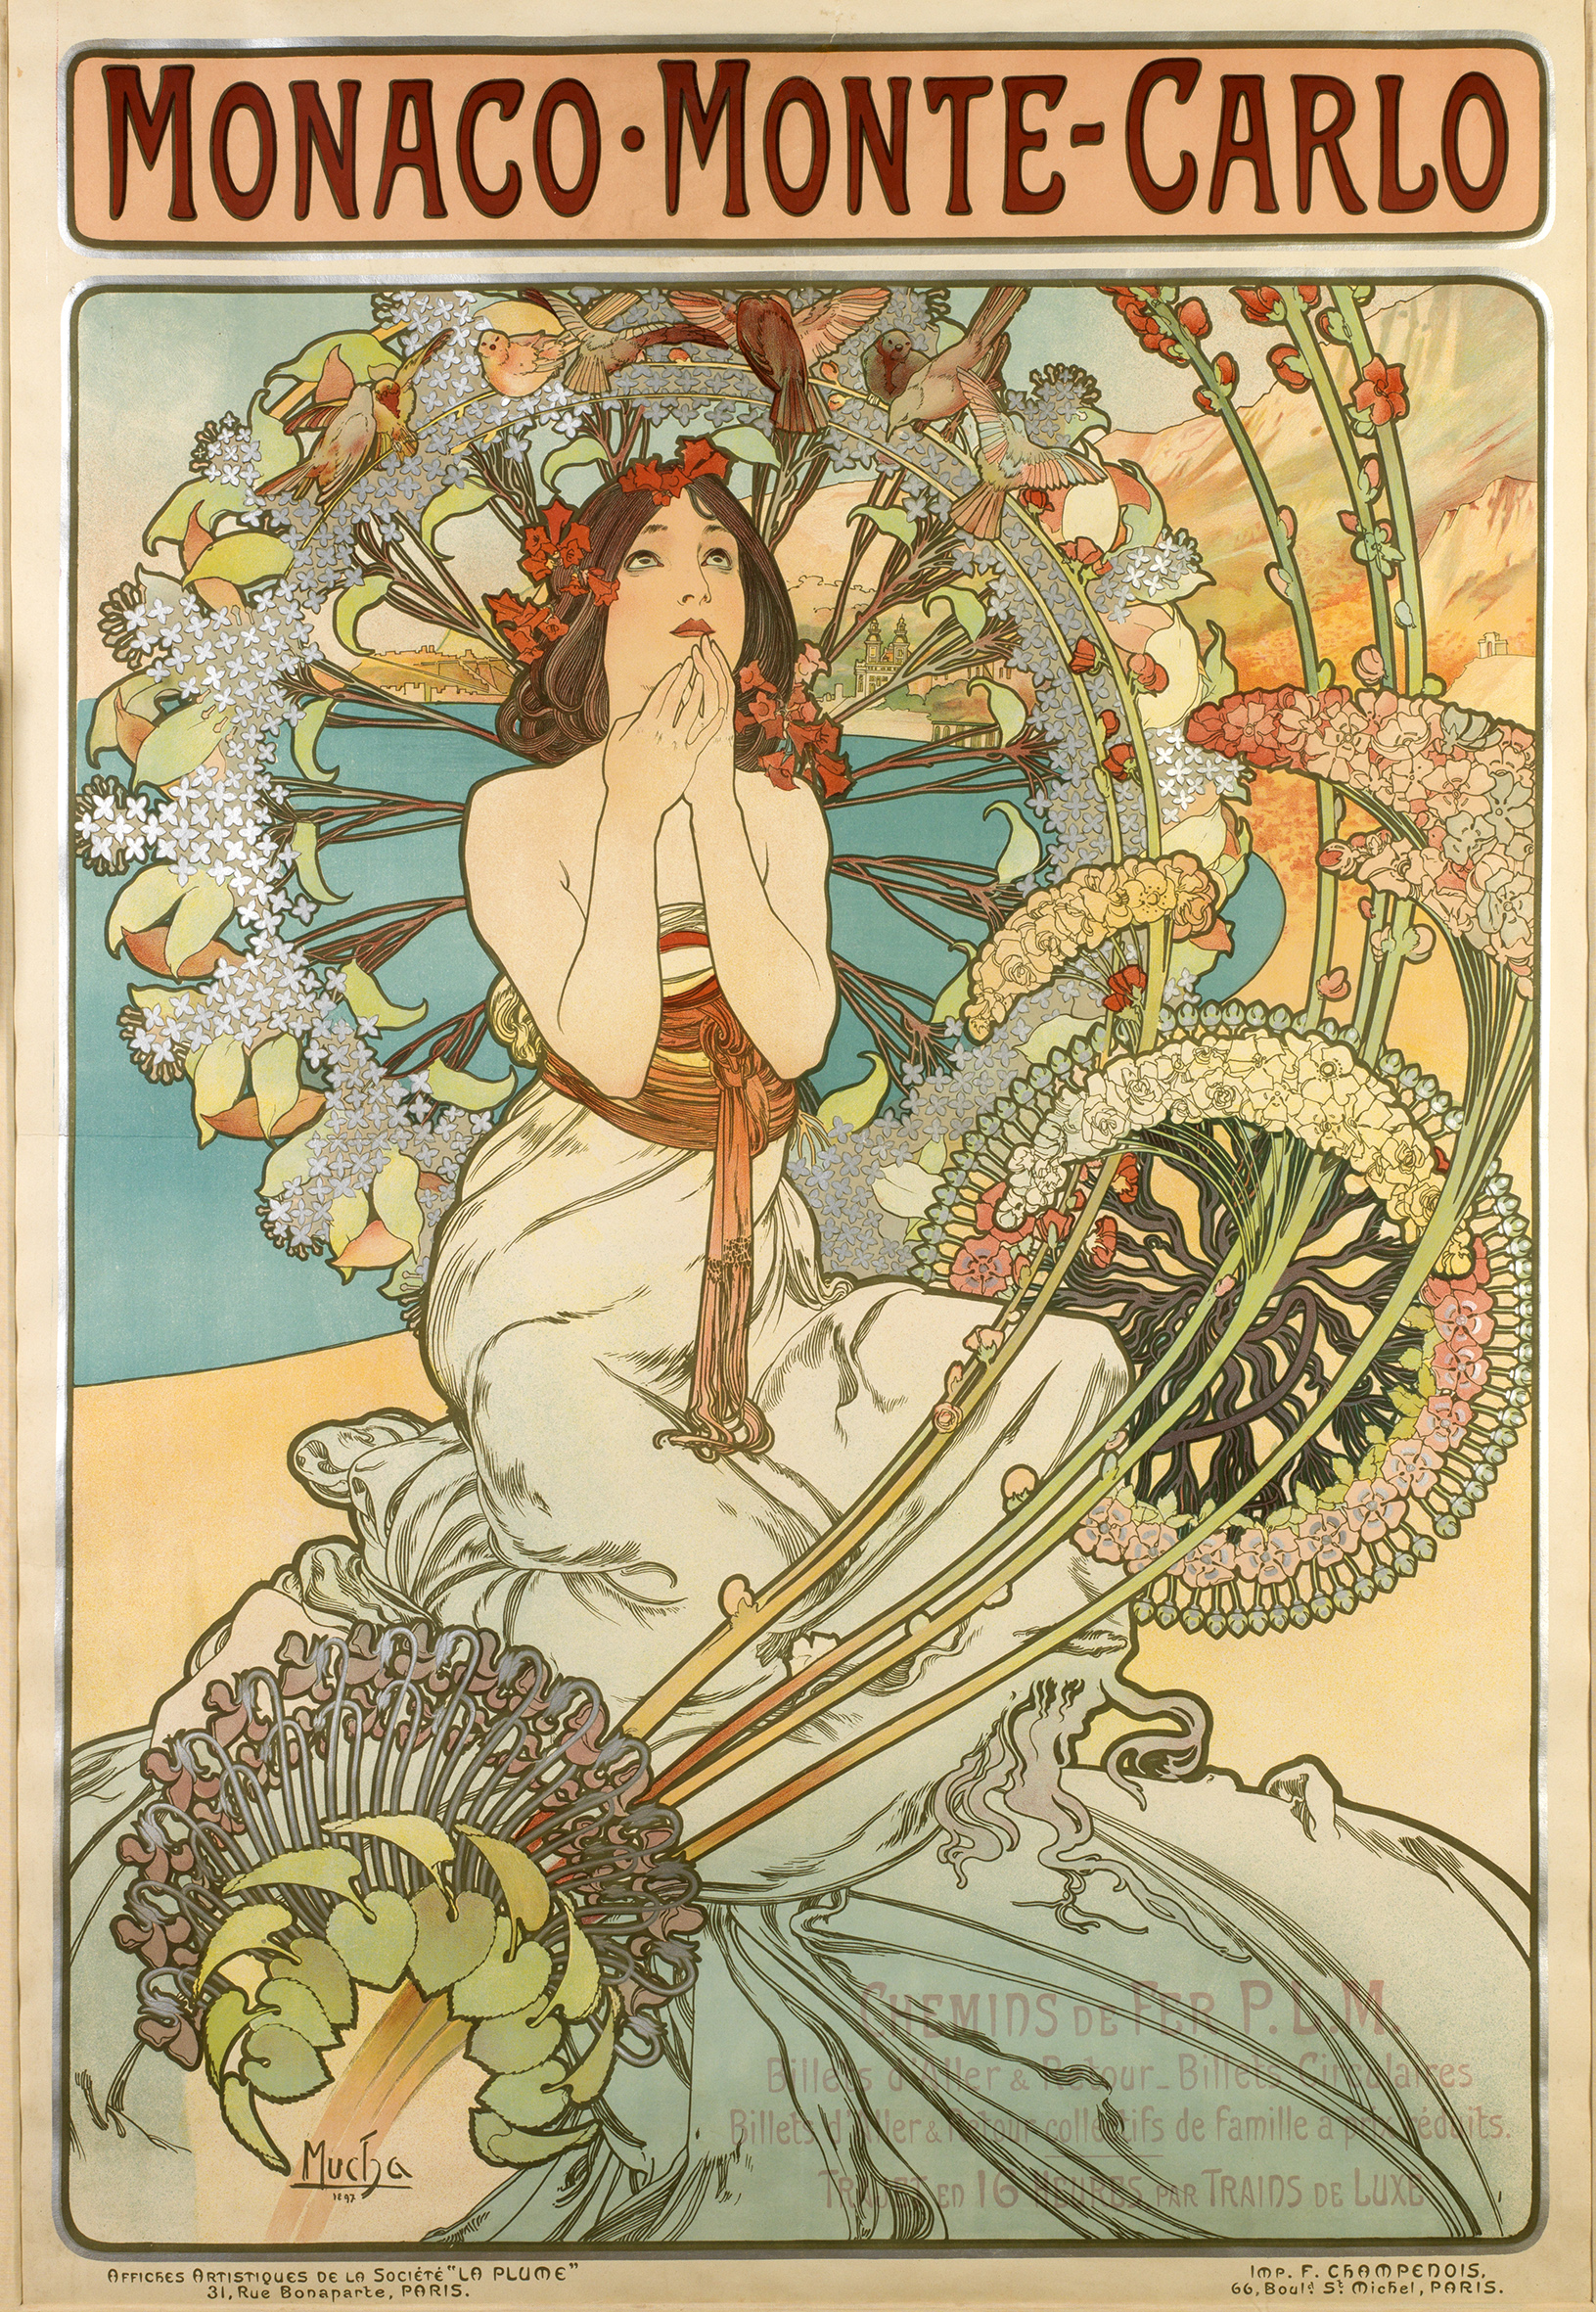 An illustrational poster of a woman with many flowers surrounding her kneeling on a beach.